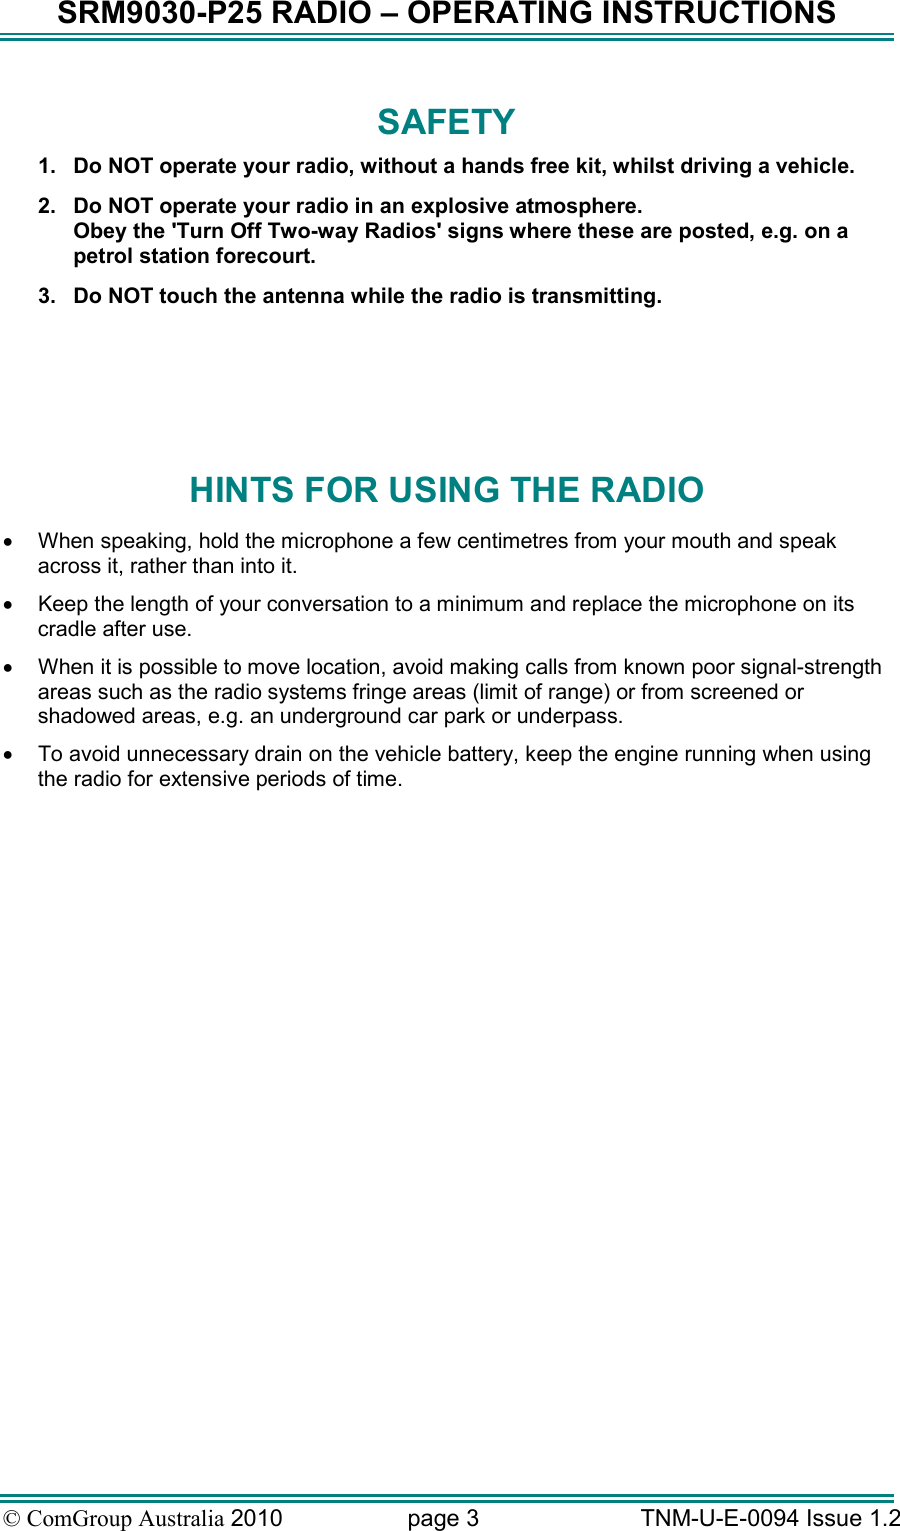 SRM9030-P25 RADIO – OPERATING INSTRUCTIONS © ComGroup Australia 2010  page 3   TNM-U-E-0094 Issue 1.2 SAFETY 1.  Do NOT operate your radio, without a hands free kit, whilst driving a vehicle.   2.  Do NOT operate your radio in an explosive atmosphere. Obey the &apos;Turn Off Two-way Radios&apos; signs where these are posted, e.g. on a petrol station forecourt. 3.  Do NOT touch the antenna while the radio is transmitting.    HINTS FOR USING THE RADIO •  When speaking, hold the microphone a few centimetres from your mouth and speak across it, rather than into it. •  Keep the length of your conversation to a minimum and replace the microphone on its cradle after use. •  When it is possible to move location, avoid making calls from known poor signal-strength areas such as the radio systems fringe areas (limit of range) or from screened or shadowed areas, e.g. an underground car park or underpass. •  To avoid unnecessary drain on the vehicle battery, keep the engine running when using the radio for extensive periods of time.  